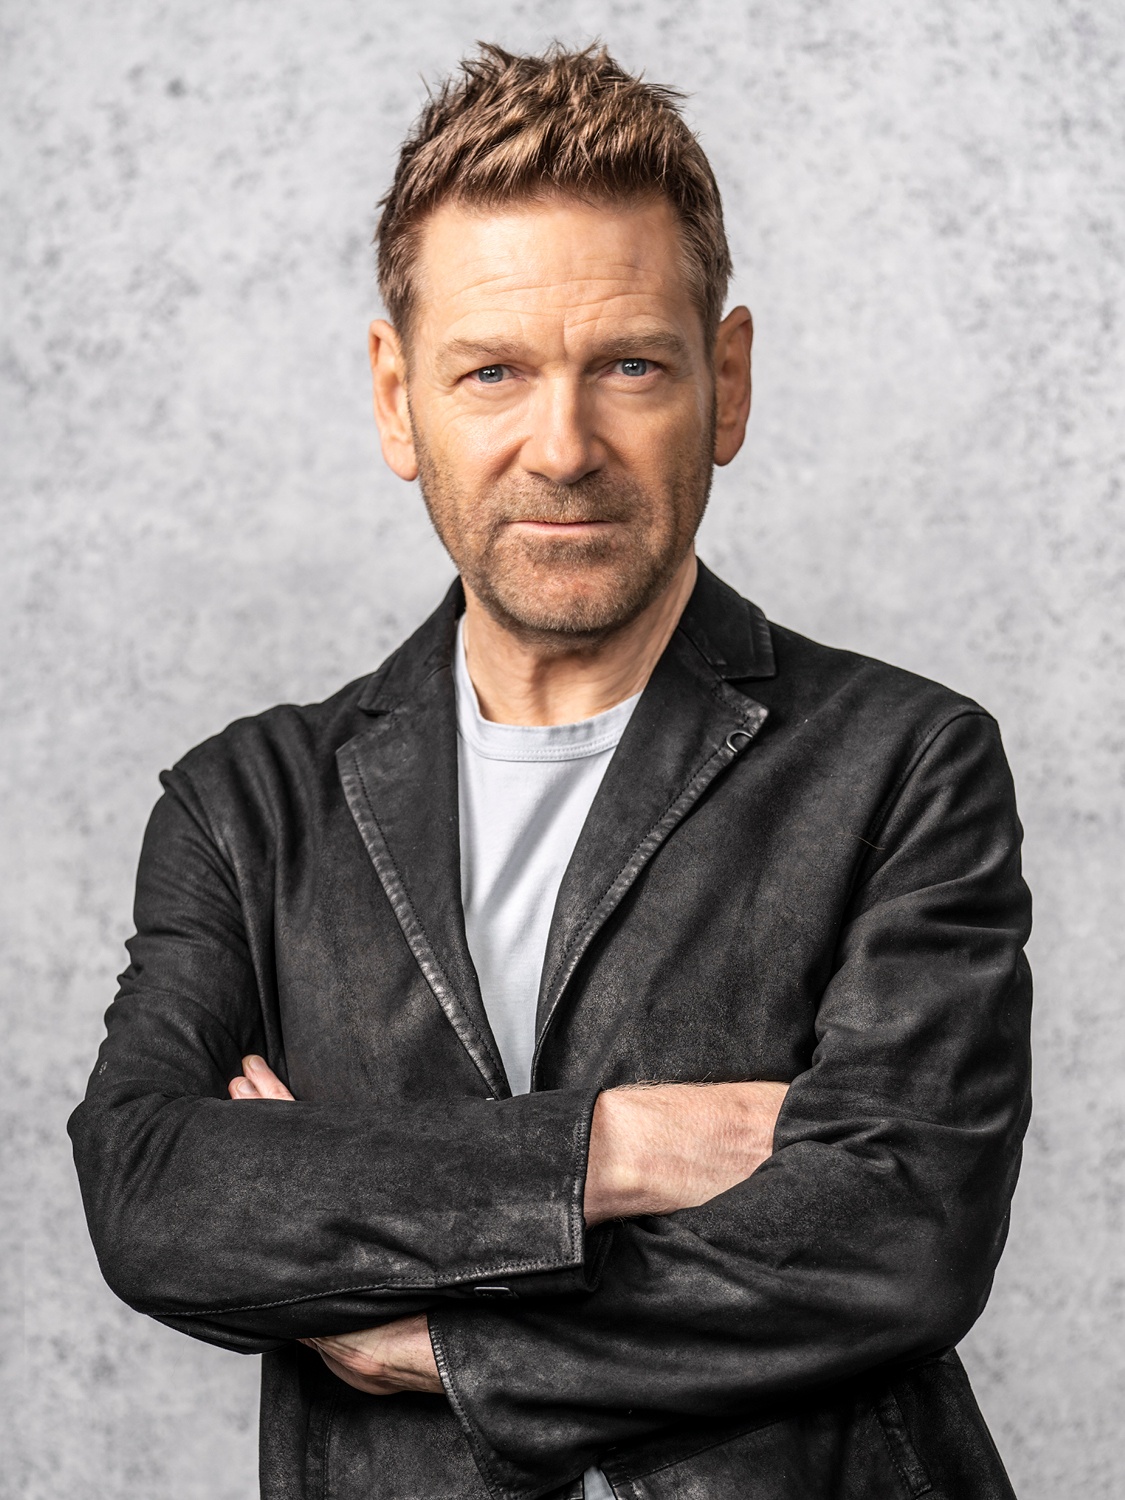 Kenneth Branagh, a white male with brown hair, stands center frame facing forward with his arms crossed. He stands in front of a blurred gray background, in an open black waxed leather blazer and light gray shirt.